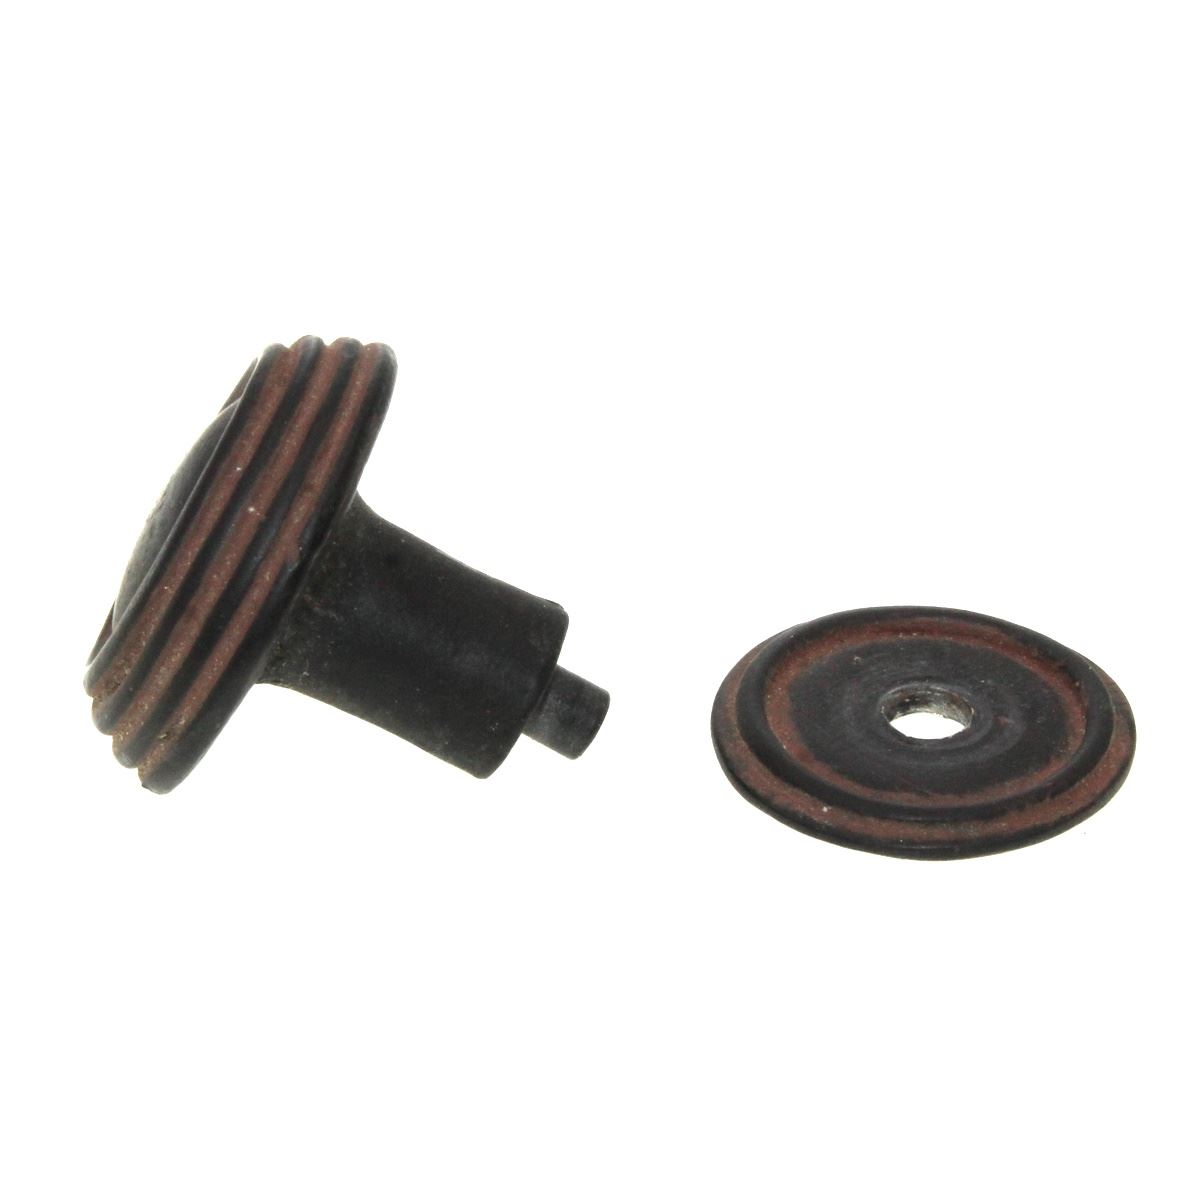 Anne at Home Rustic Sonnet 1 1/4" Knob Black with Terra Cotta Wash 1302-730